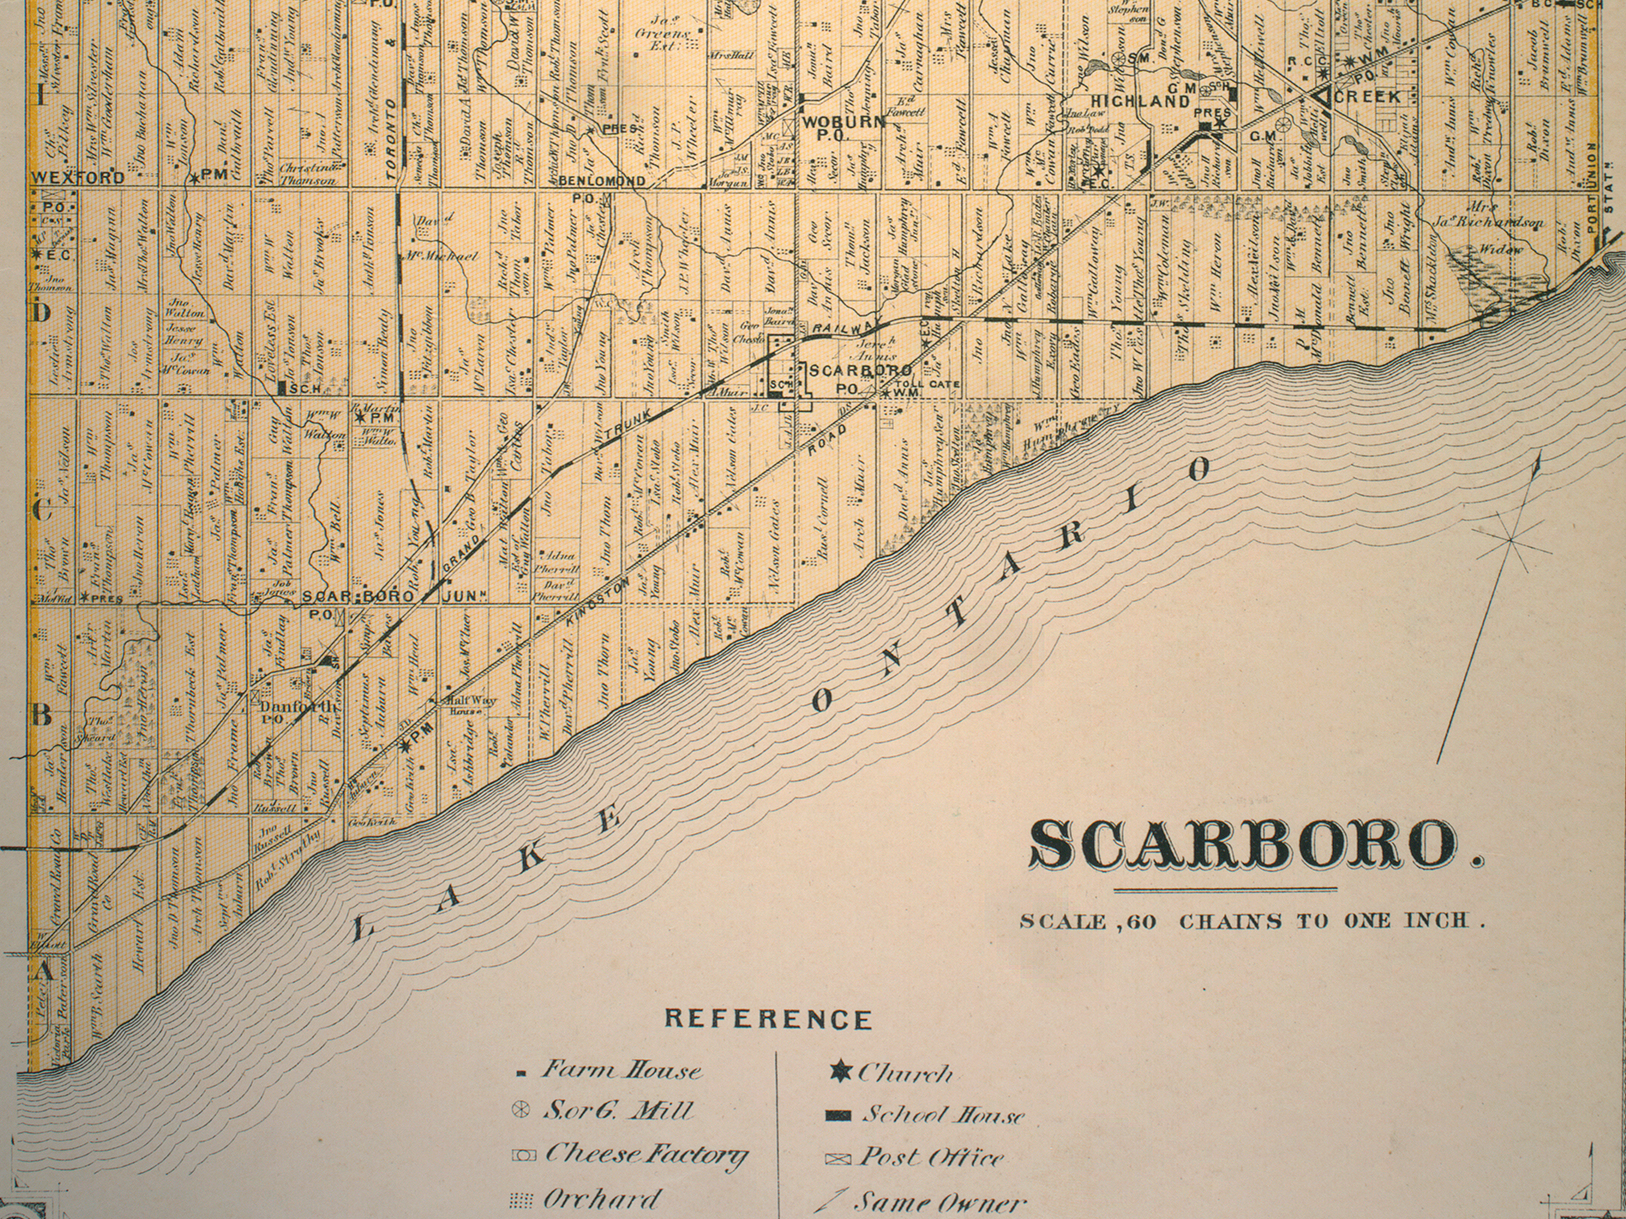 A historical map of Scarborough from 1850